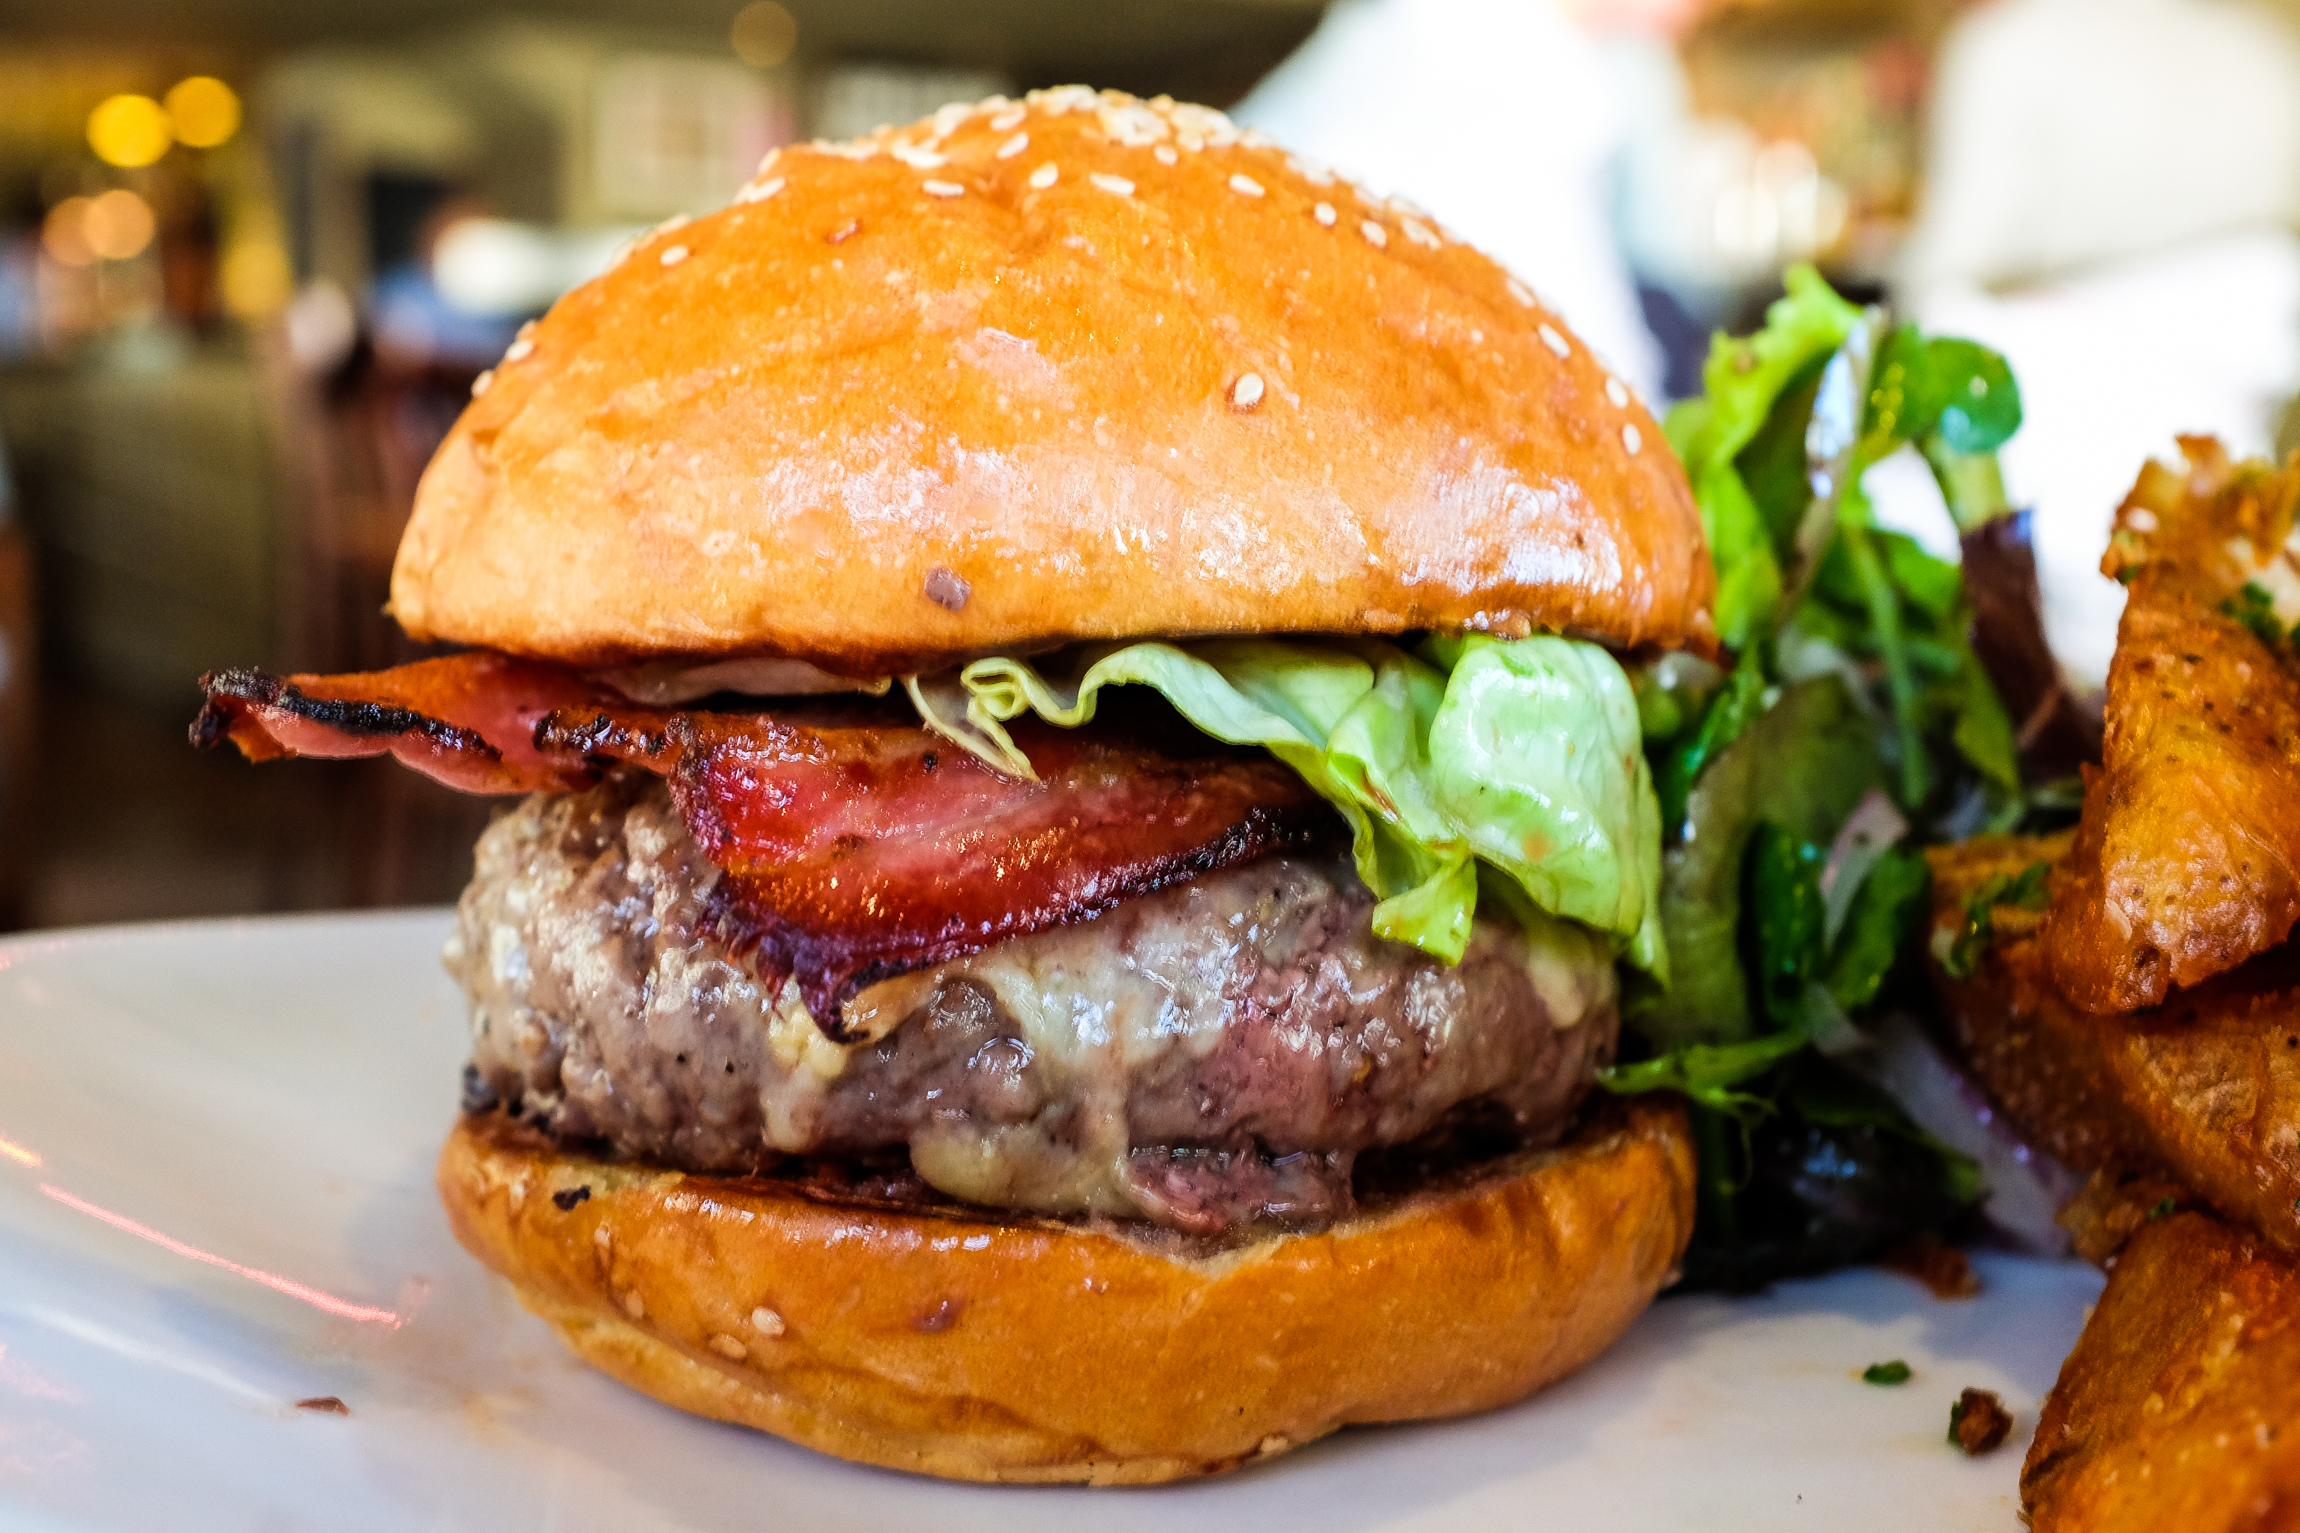 Closeup on a burger featuring a thick patty, bacon, lettuce, and cheese, with thick fries on the edge of the frame